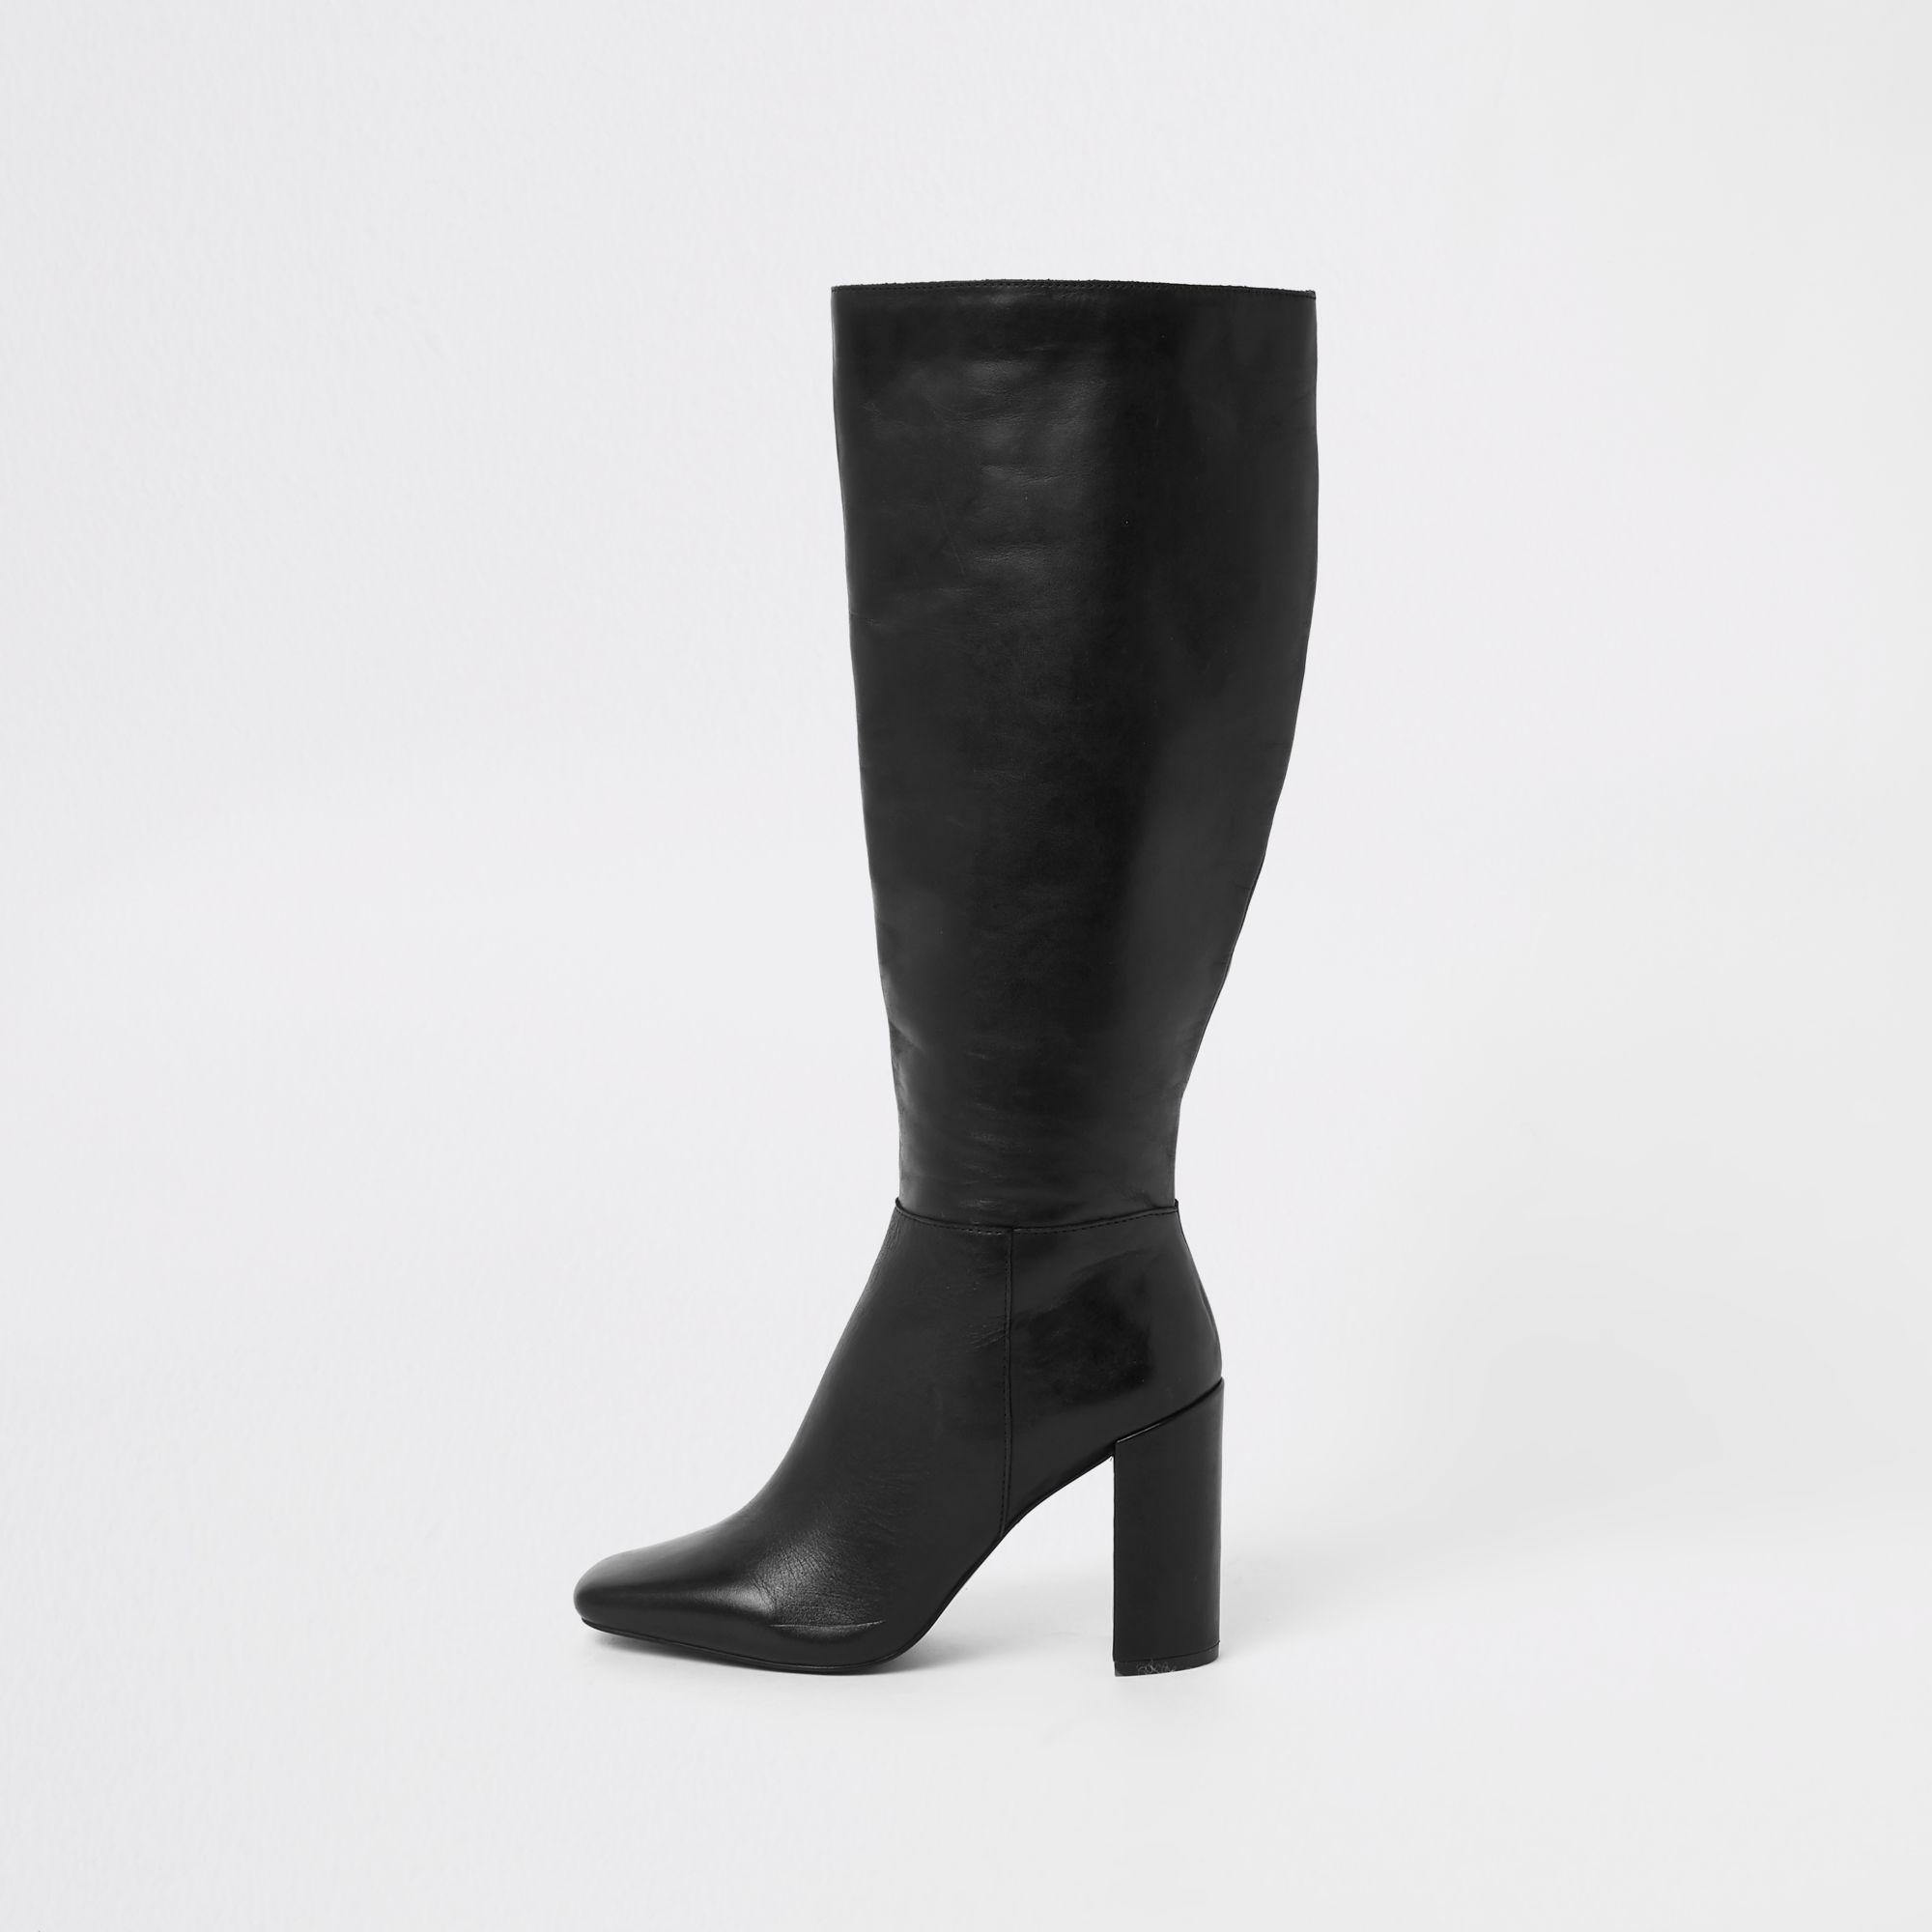 River Island Leather Square Toe Knee High Boots in Black | Lyst